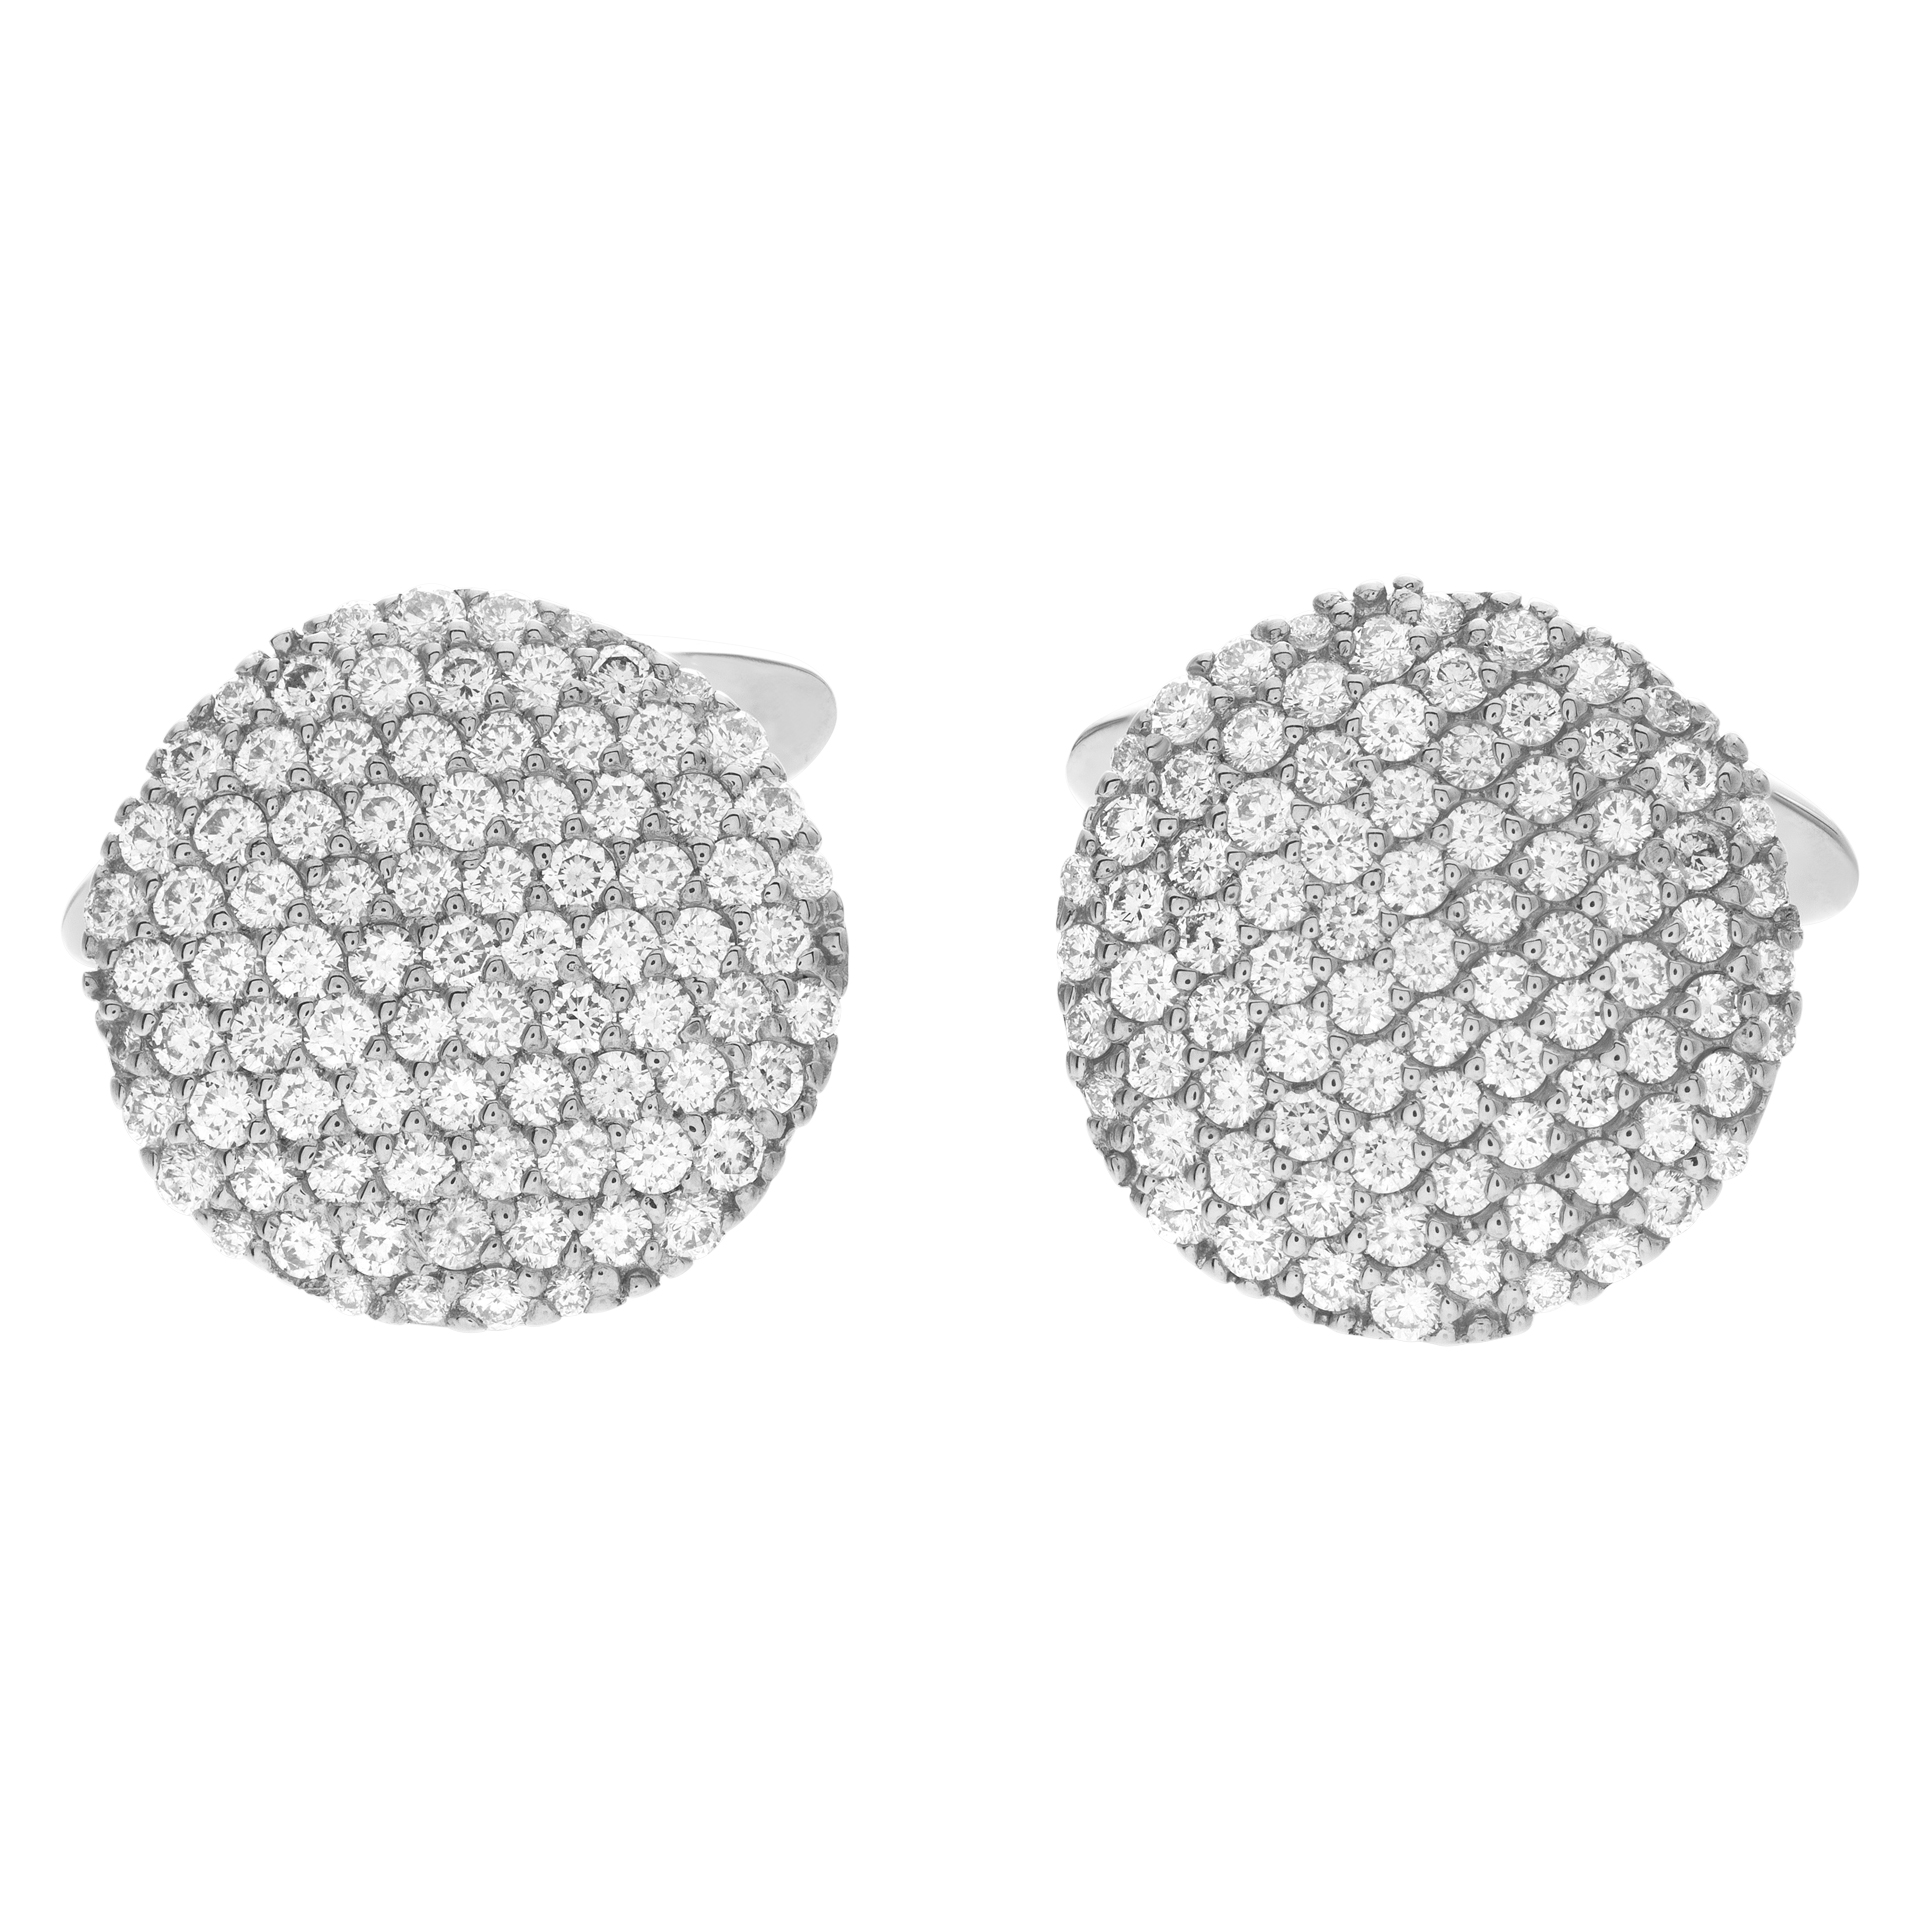 18k white gold pave set circle cufflinks with 2.5 carats in diamonds image 1